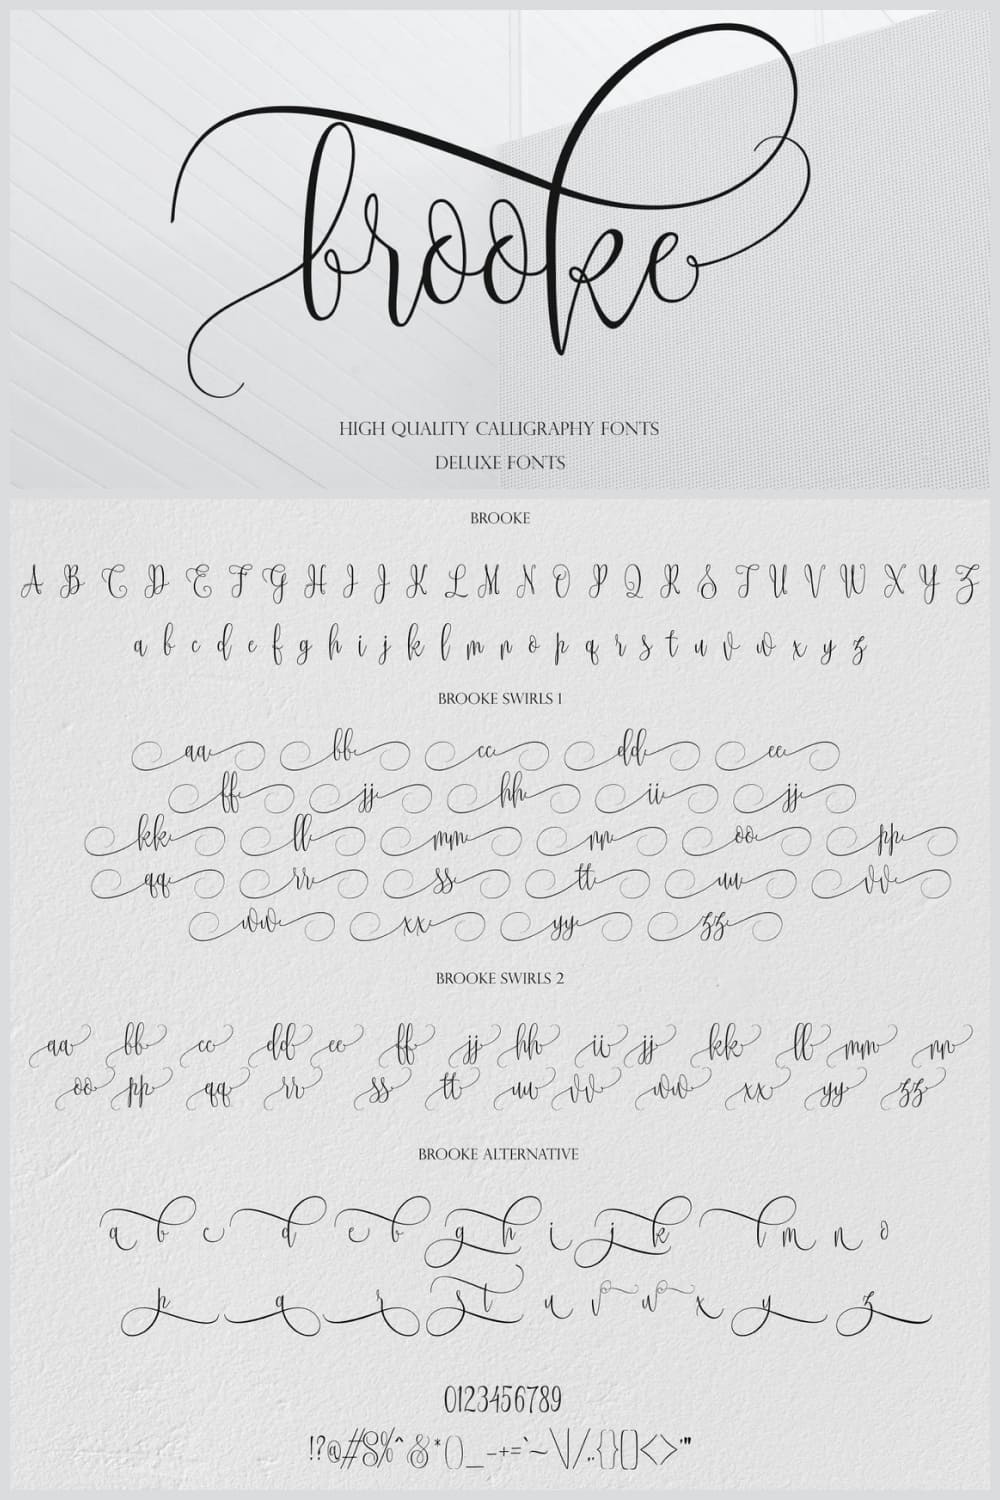 Letters of an ornate wedding font on a gray background.